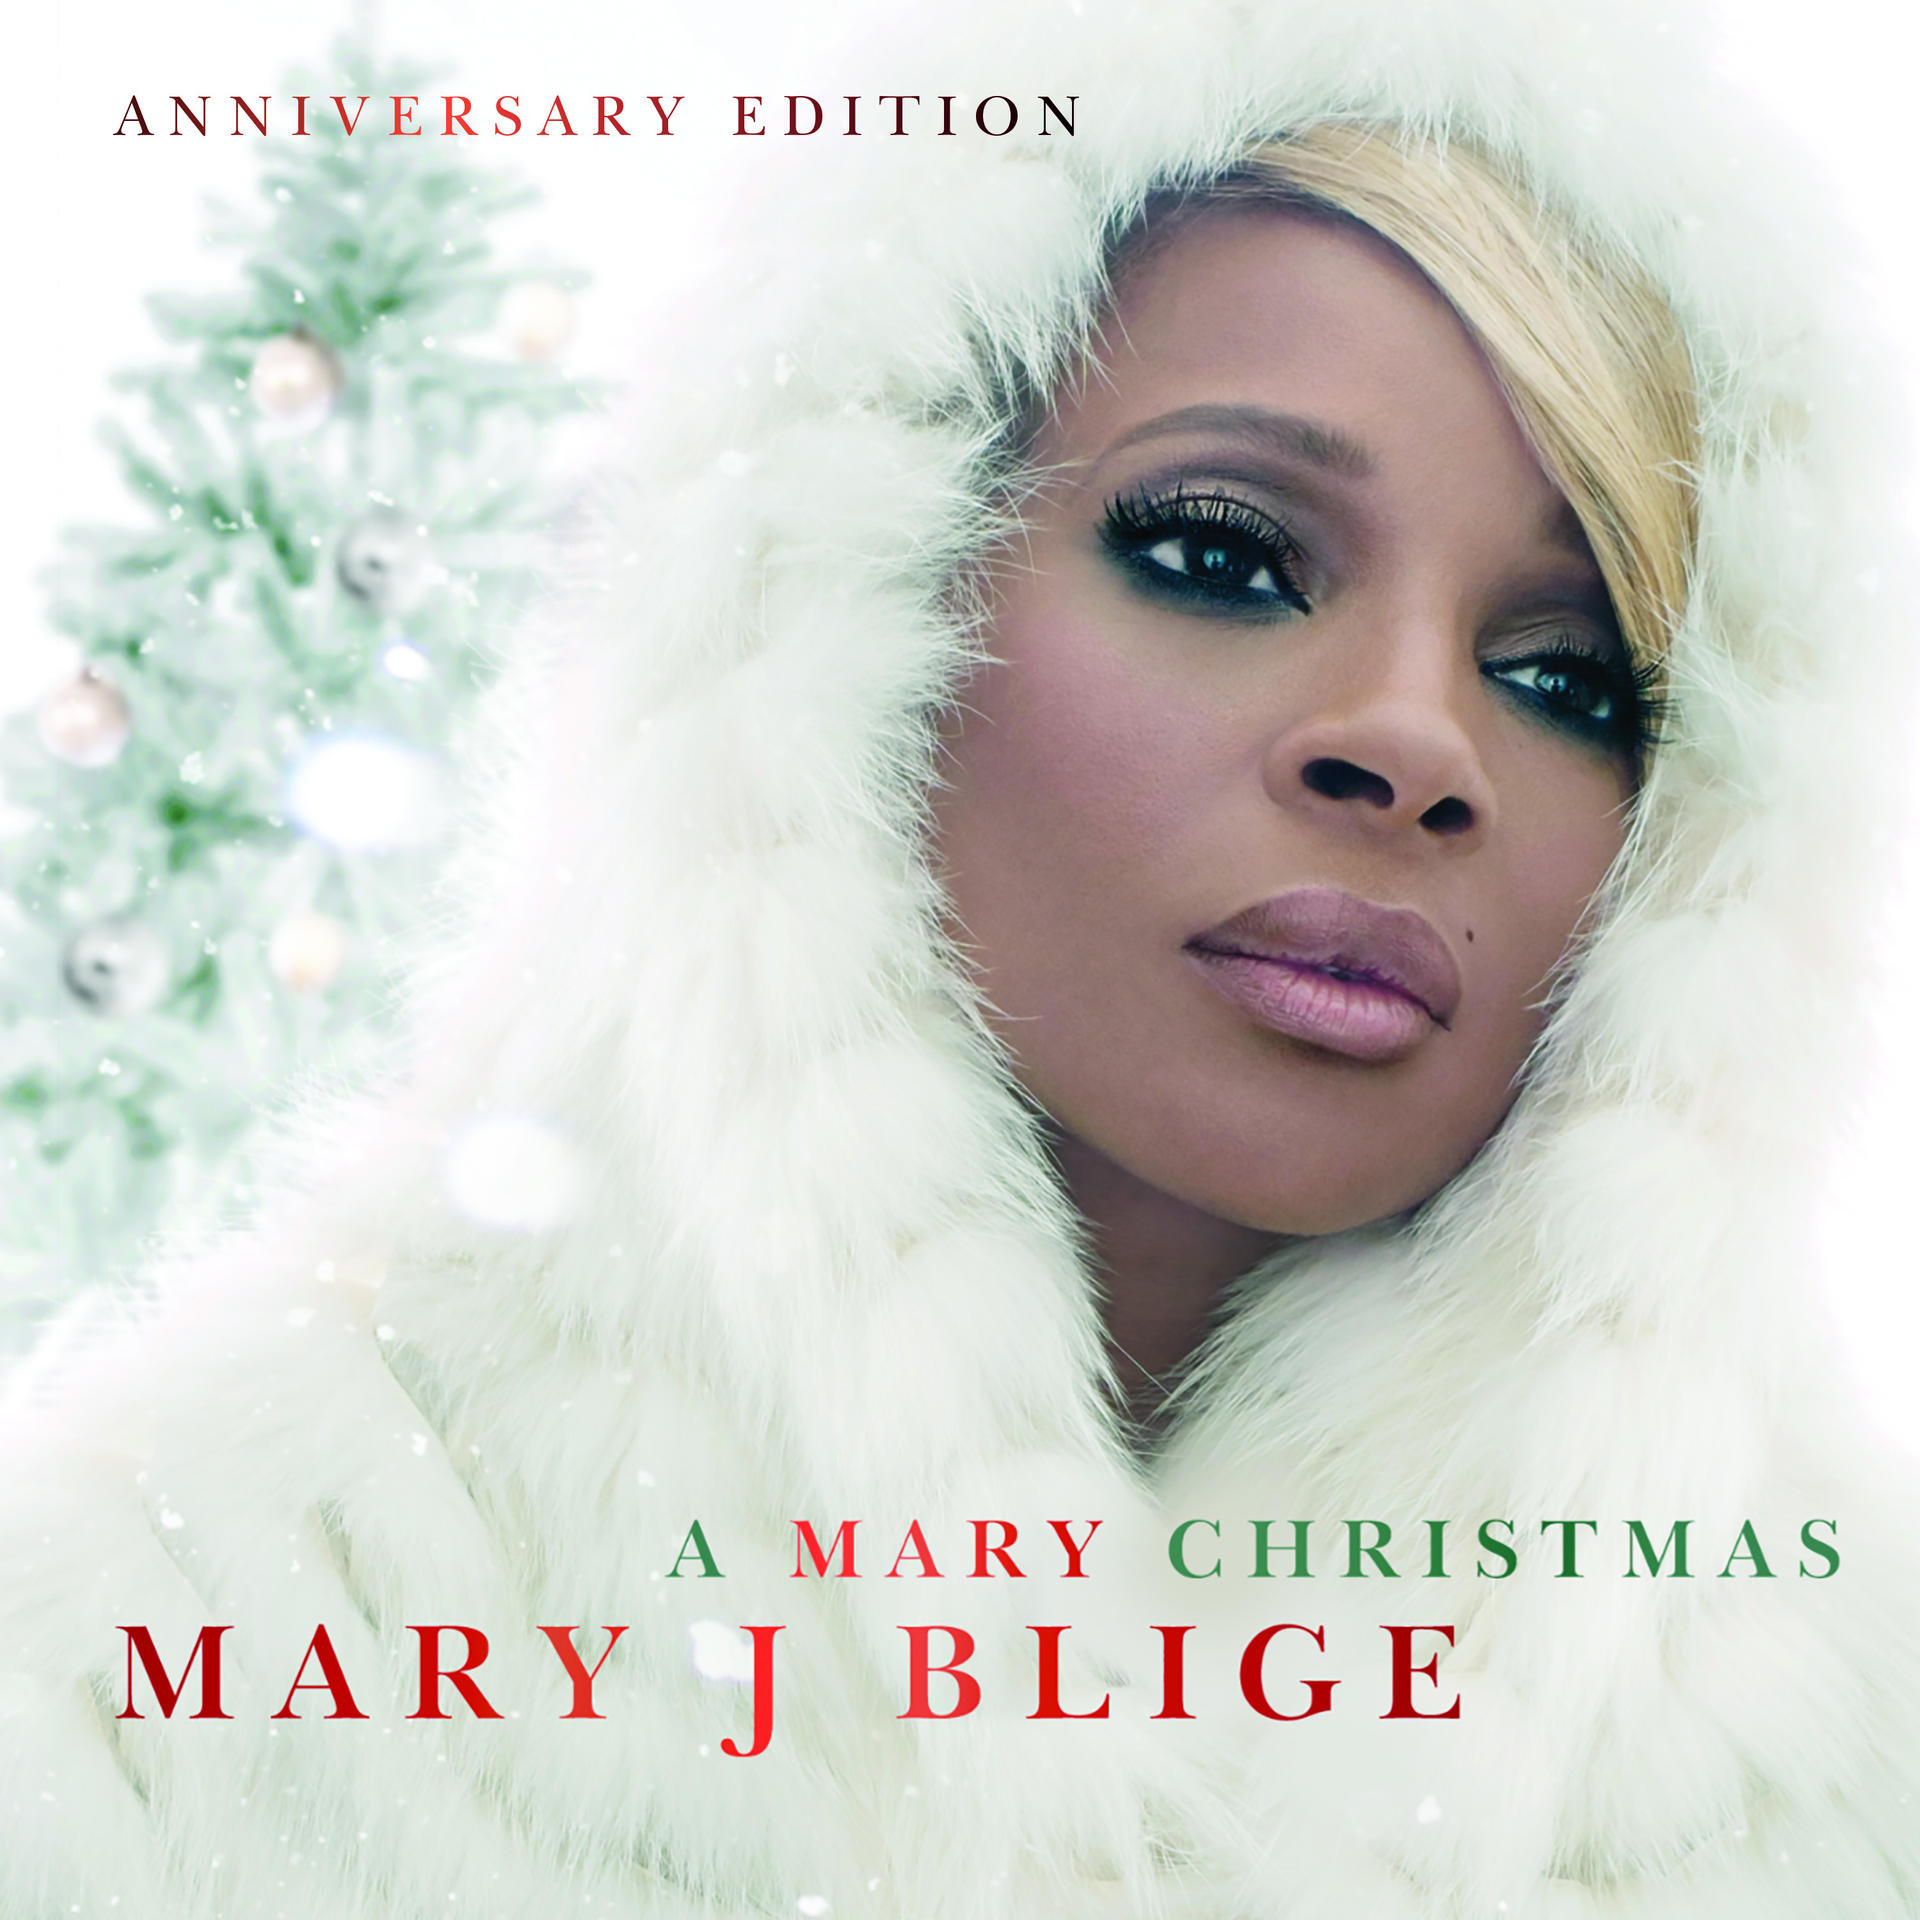 Mary J. Blige - A Christmas Edition) Mary (Anniversary (CD) 